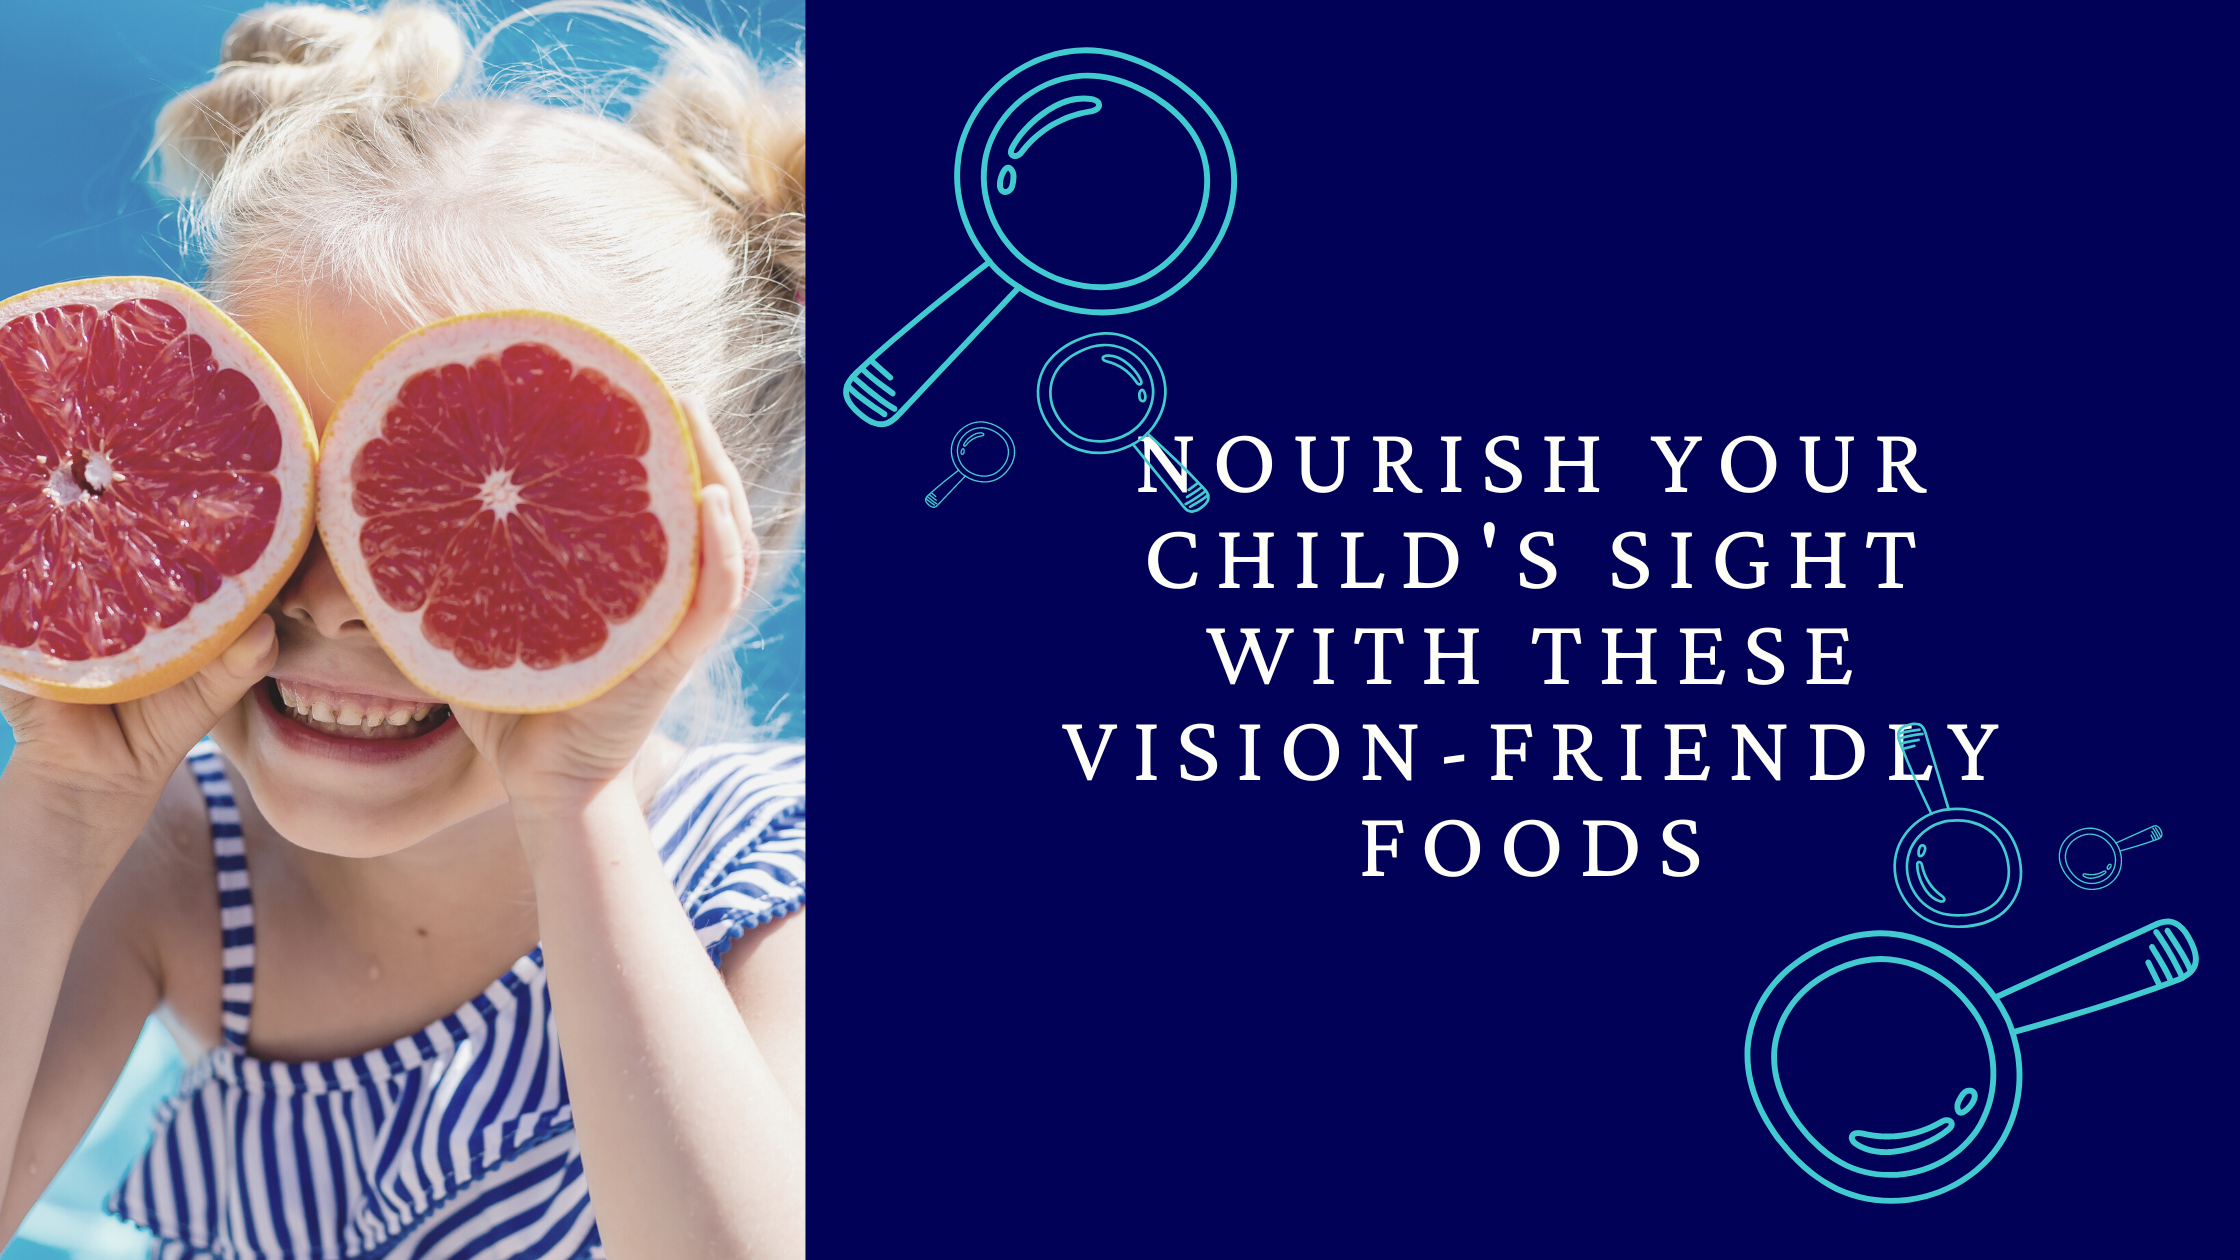 Nourish Your Child’s Sight with These Vision-Friendly Foods